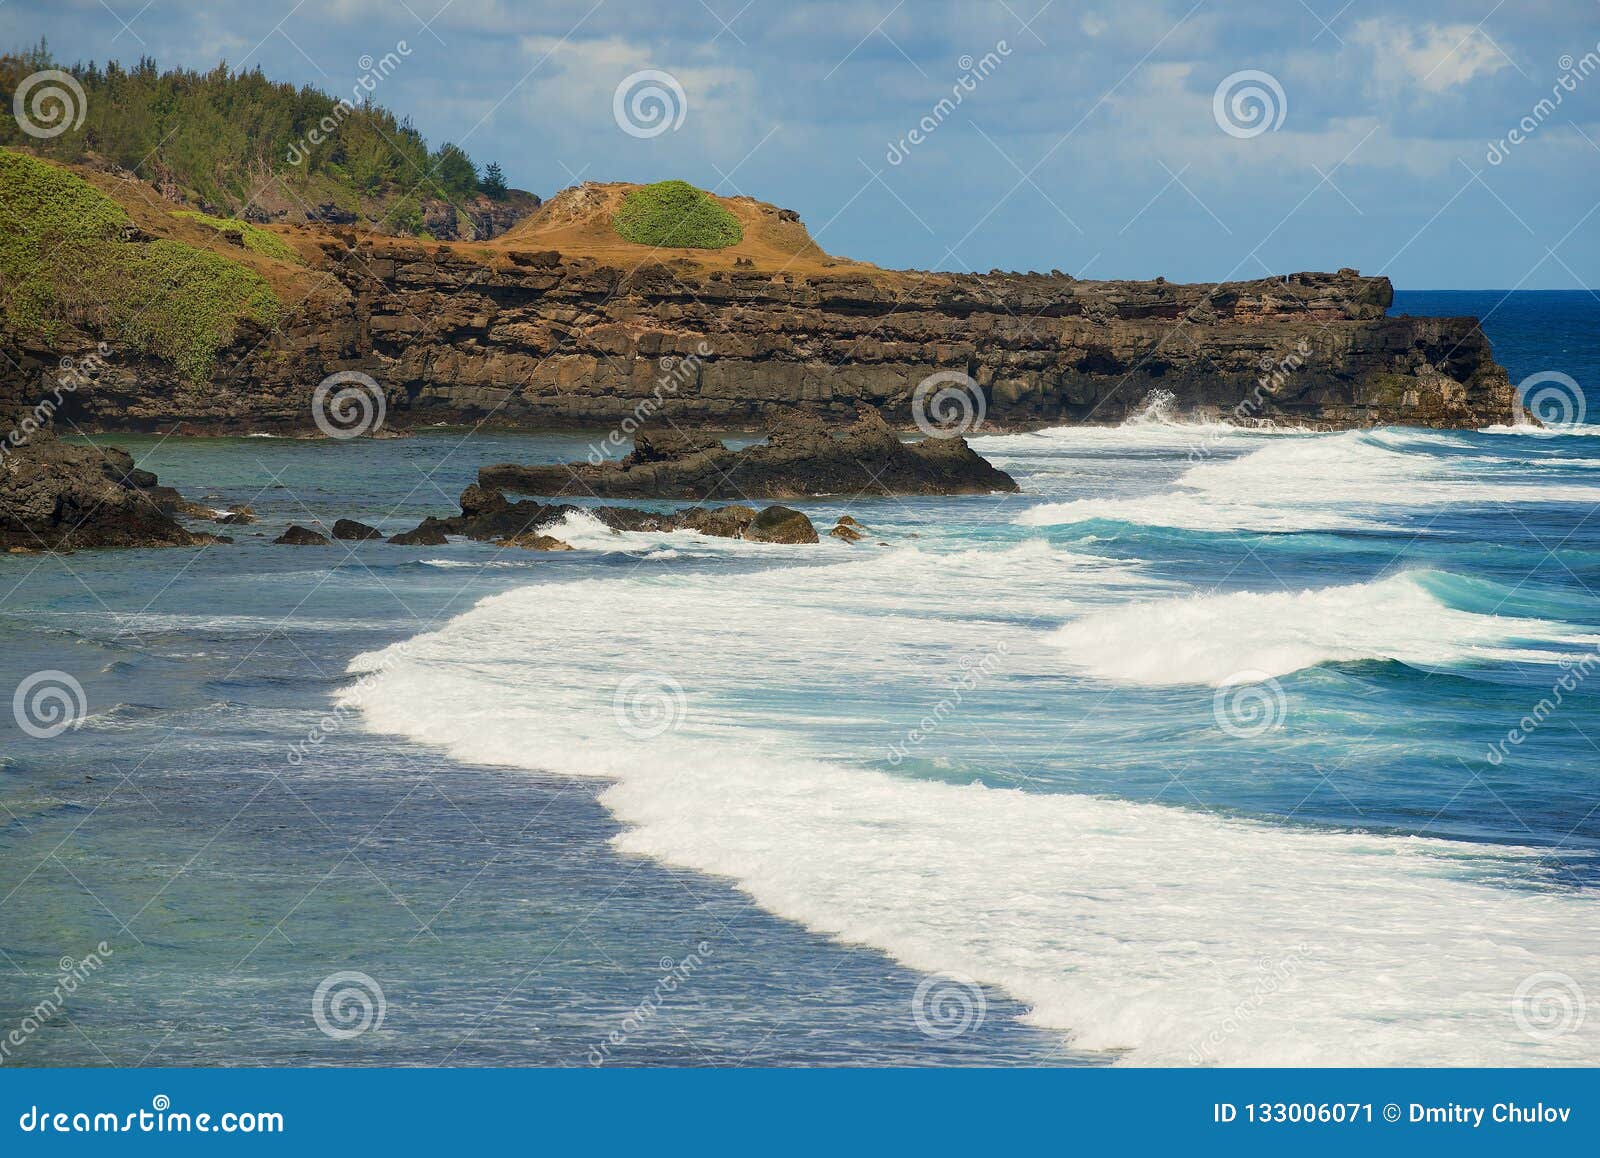 beautiful gris-gris cape with blue sky and indian ocean waves at mauritius island.